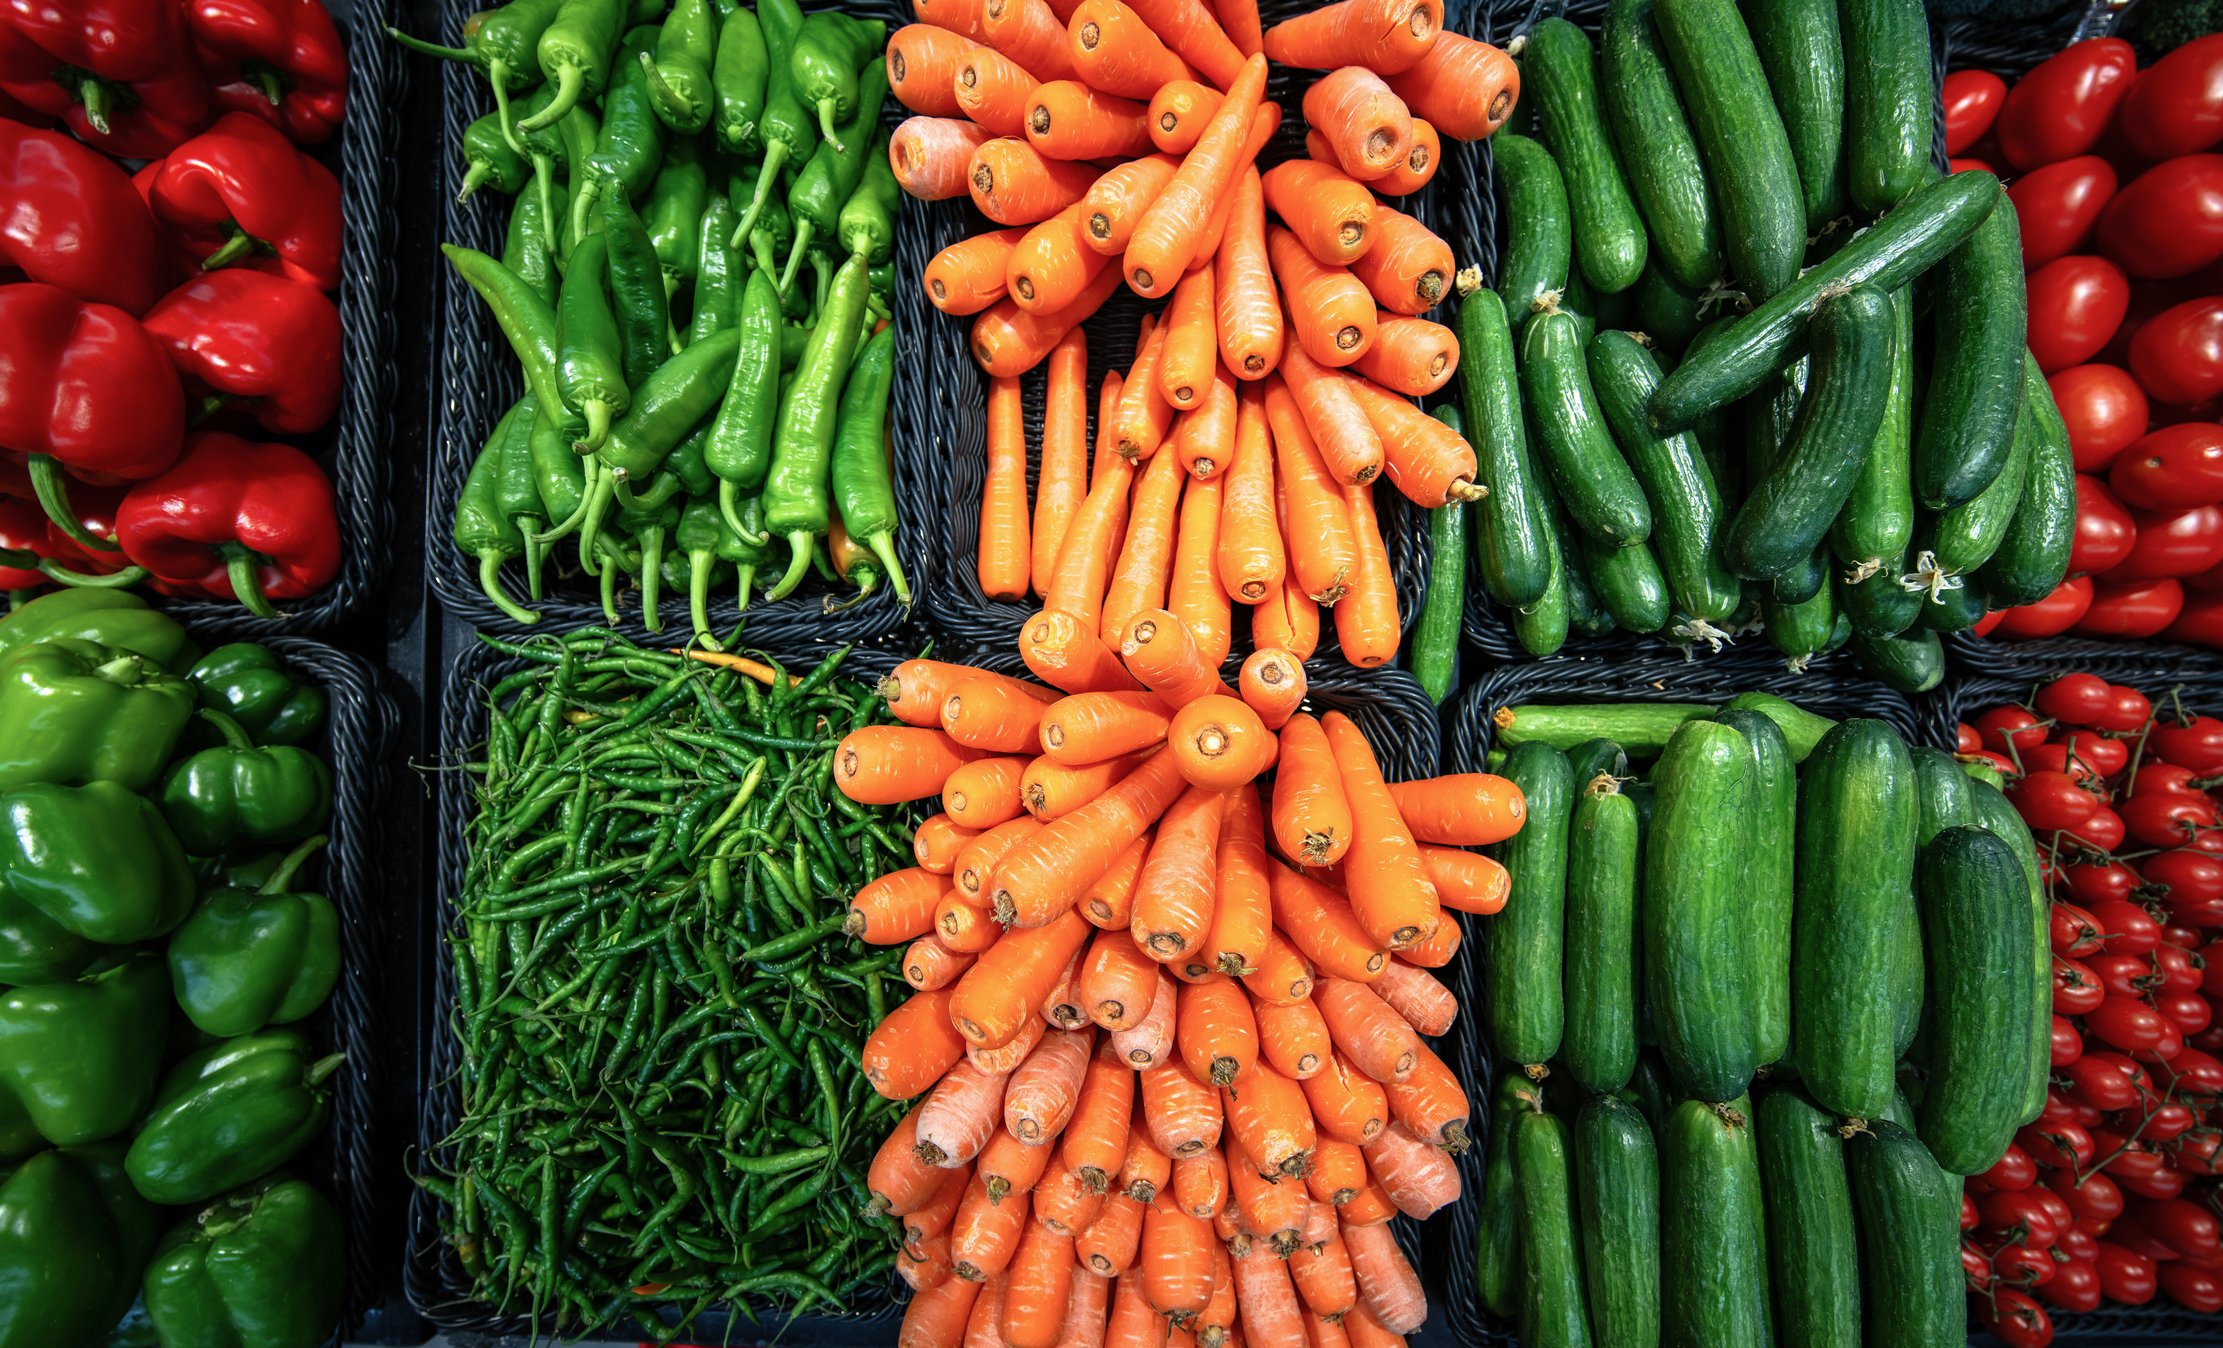 Fresh and colourful vegetables | Photo: Getty Images